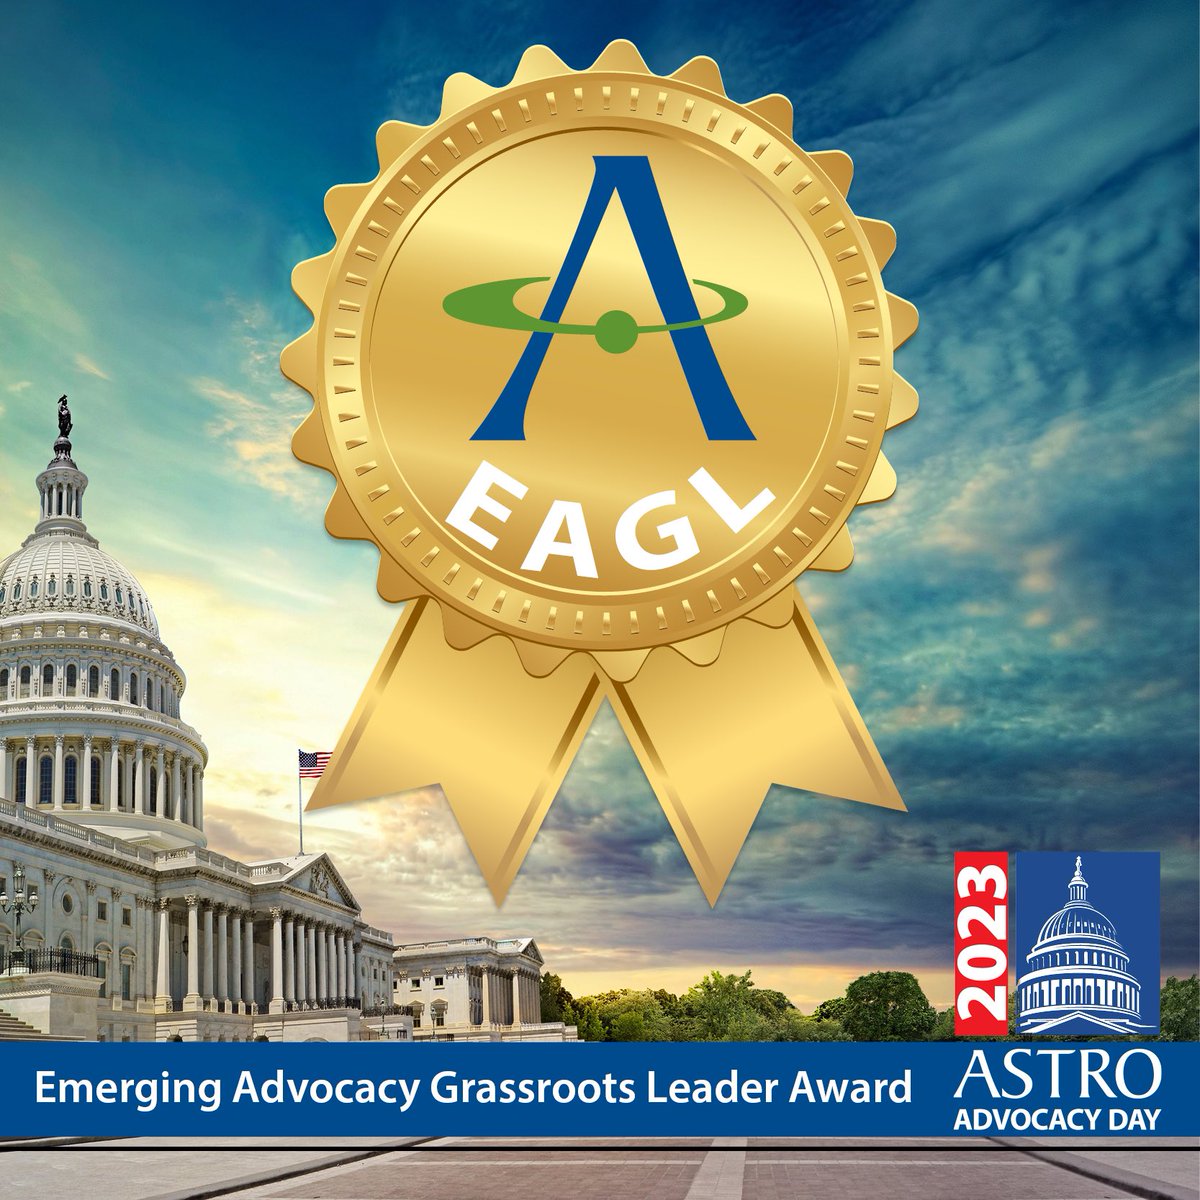 What a great day in D.C. advocating for #RadOnc and our patients! #ASTROAdvocacy Day asking for:

1️⃣ #FixPriorAuth
2️⃣ Improve access to care ⬅️ stabilize physician payments 
3️⃣ Fund #CancerResearch

Thank you @ASTRO_org for this opportunity through the EAGL grant! @VUMCRadOnc